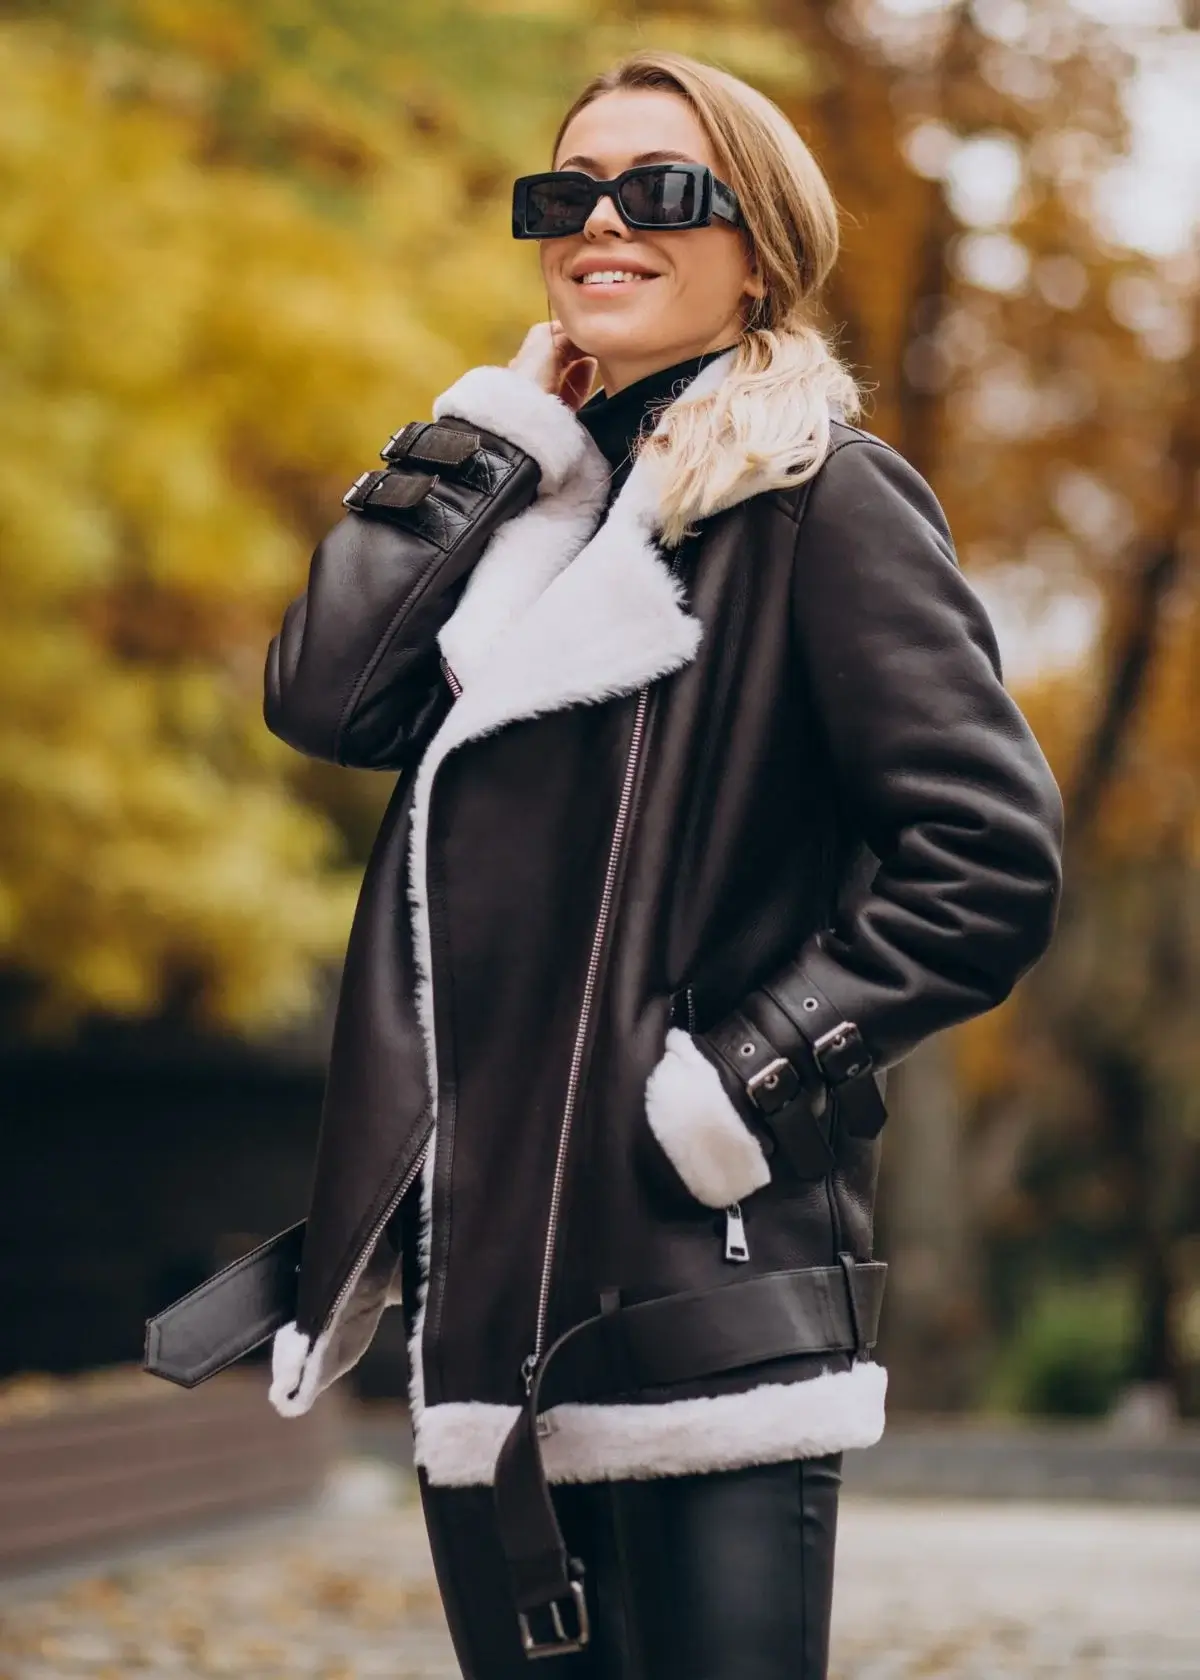 How to choose the right fall jackets for women?